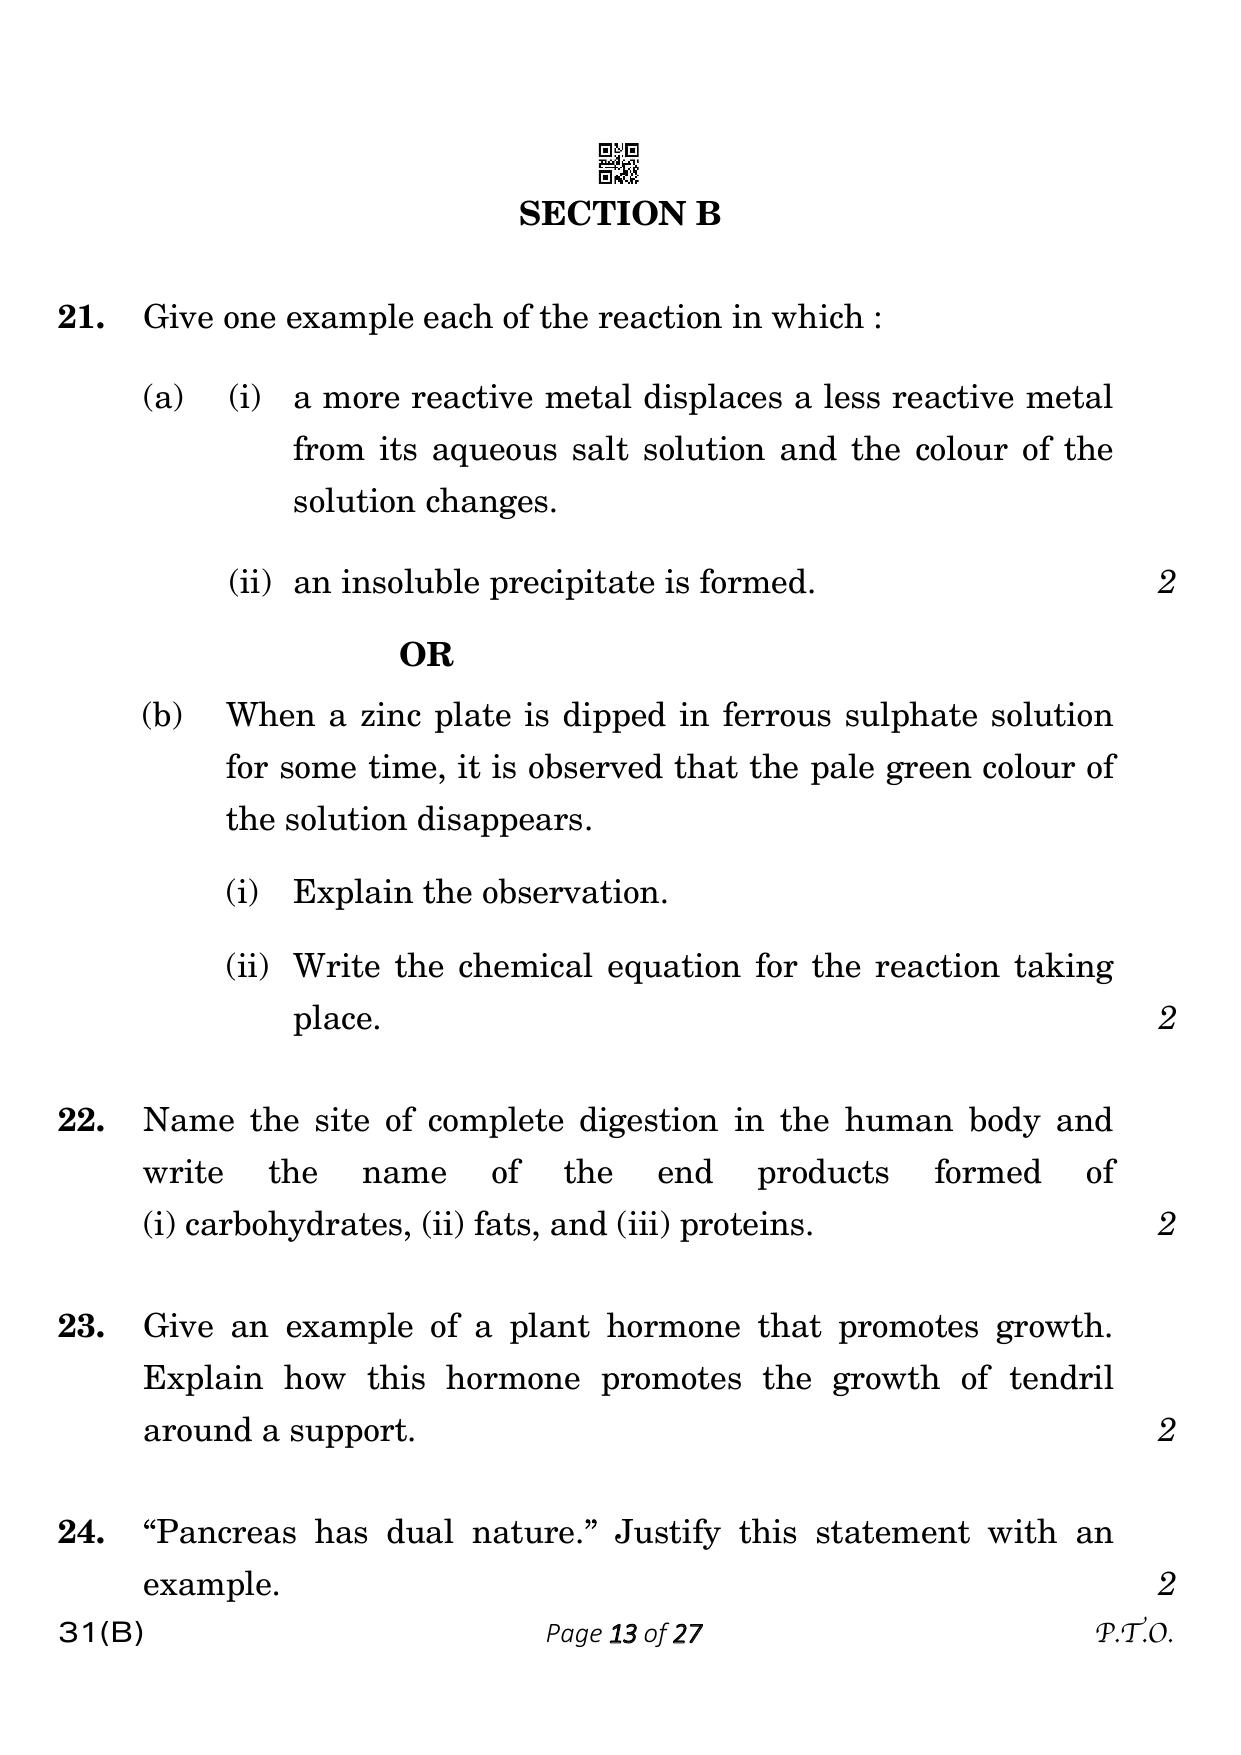 CBSE Class 10 31-B Science 2023 (Compartment) Question Paper - Page 13